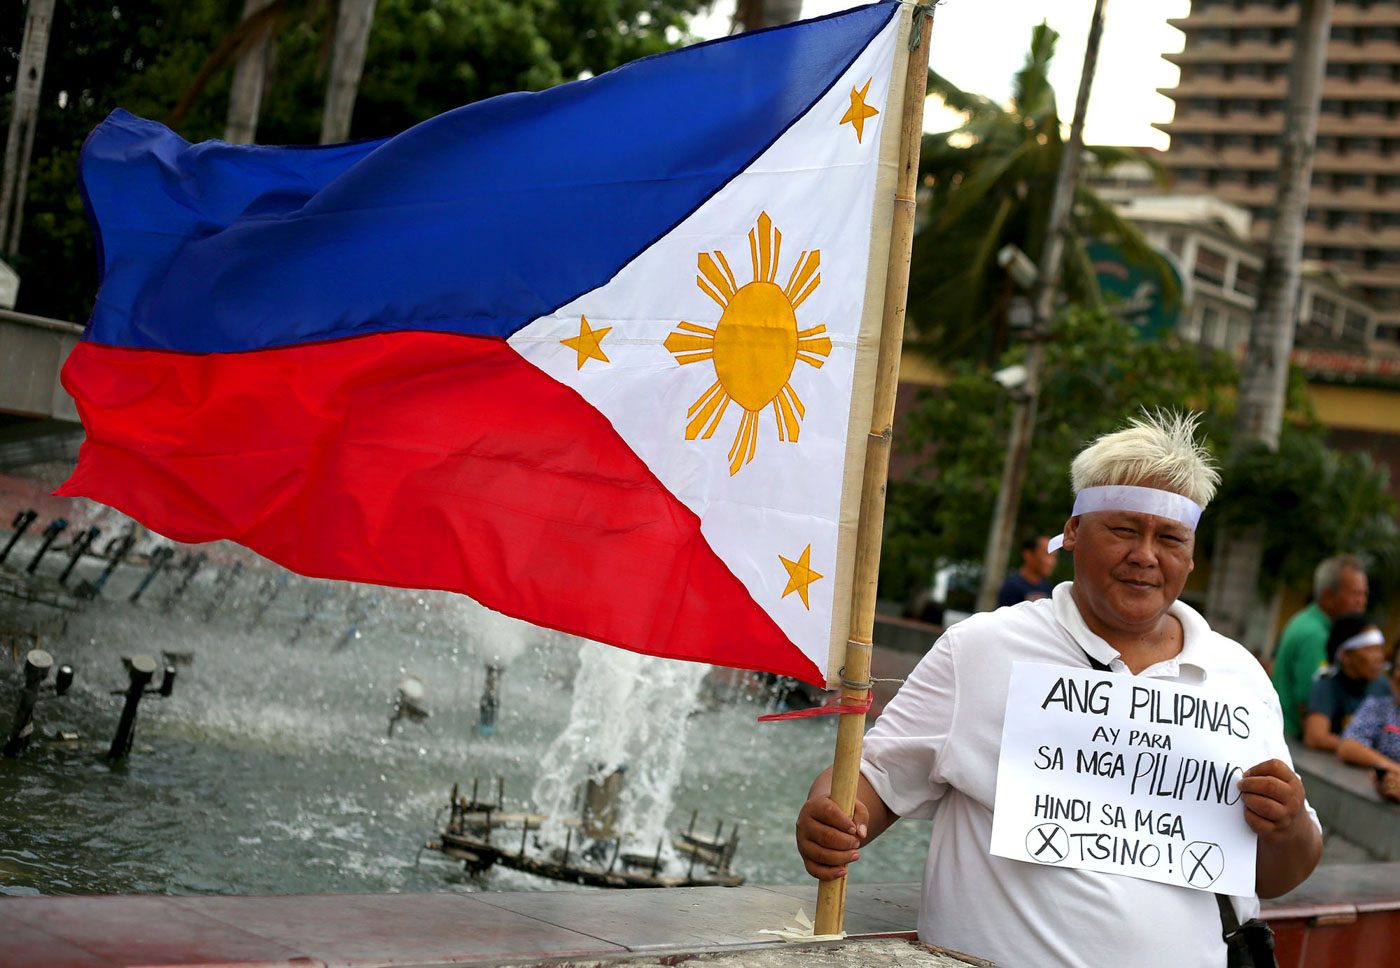 93% of Filipinos want PH to regain China-occupied islands